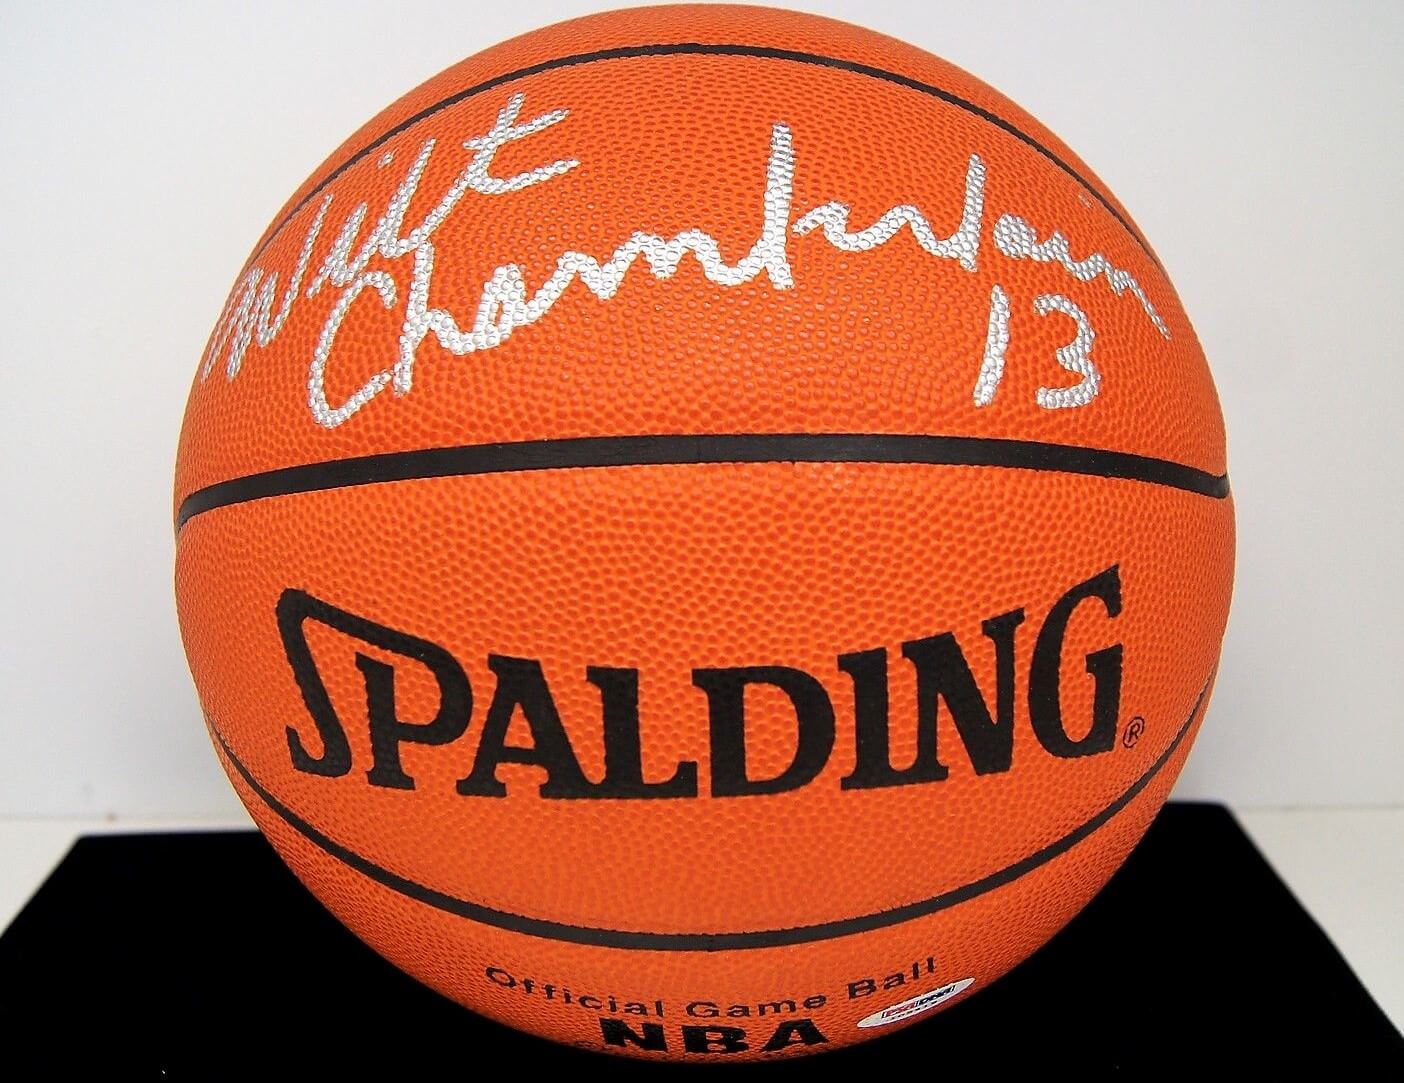 Spalding Basketball Signed by Wilt Chamberlain at Americash in Westmont